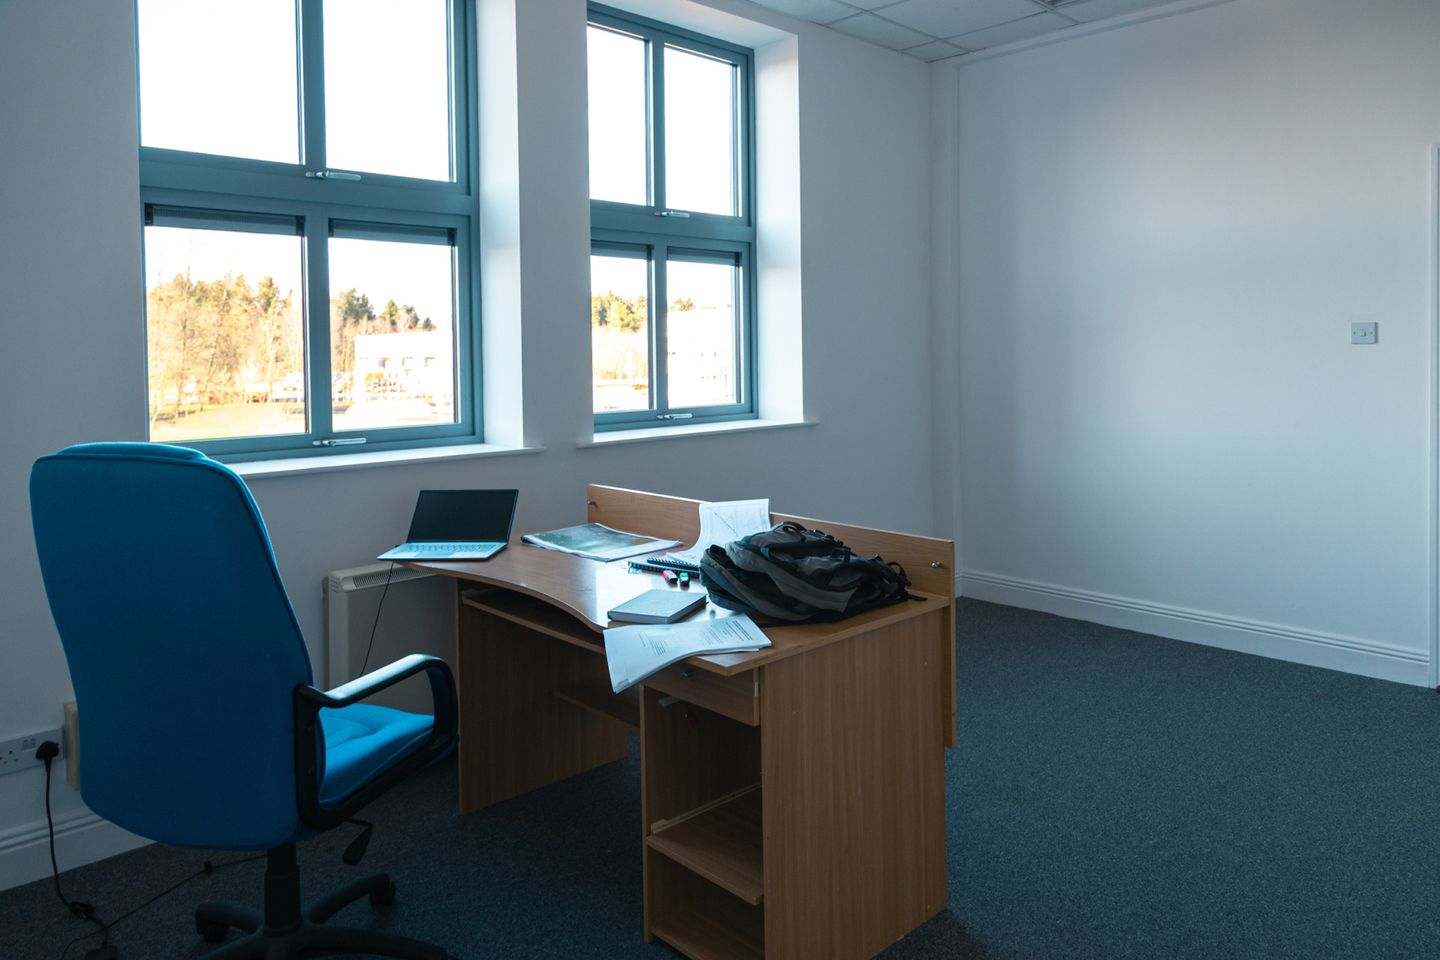 C4 & C5 Office Suite, ACDAL, Station Road, Allenwood, Co. Kildare